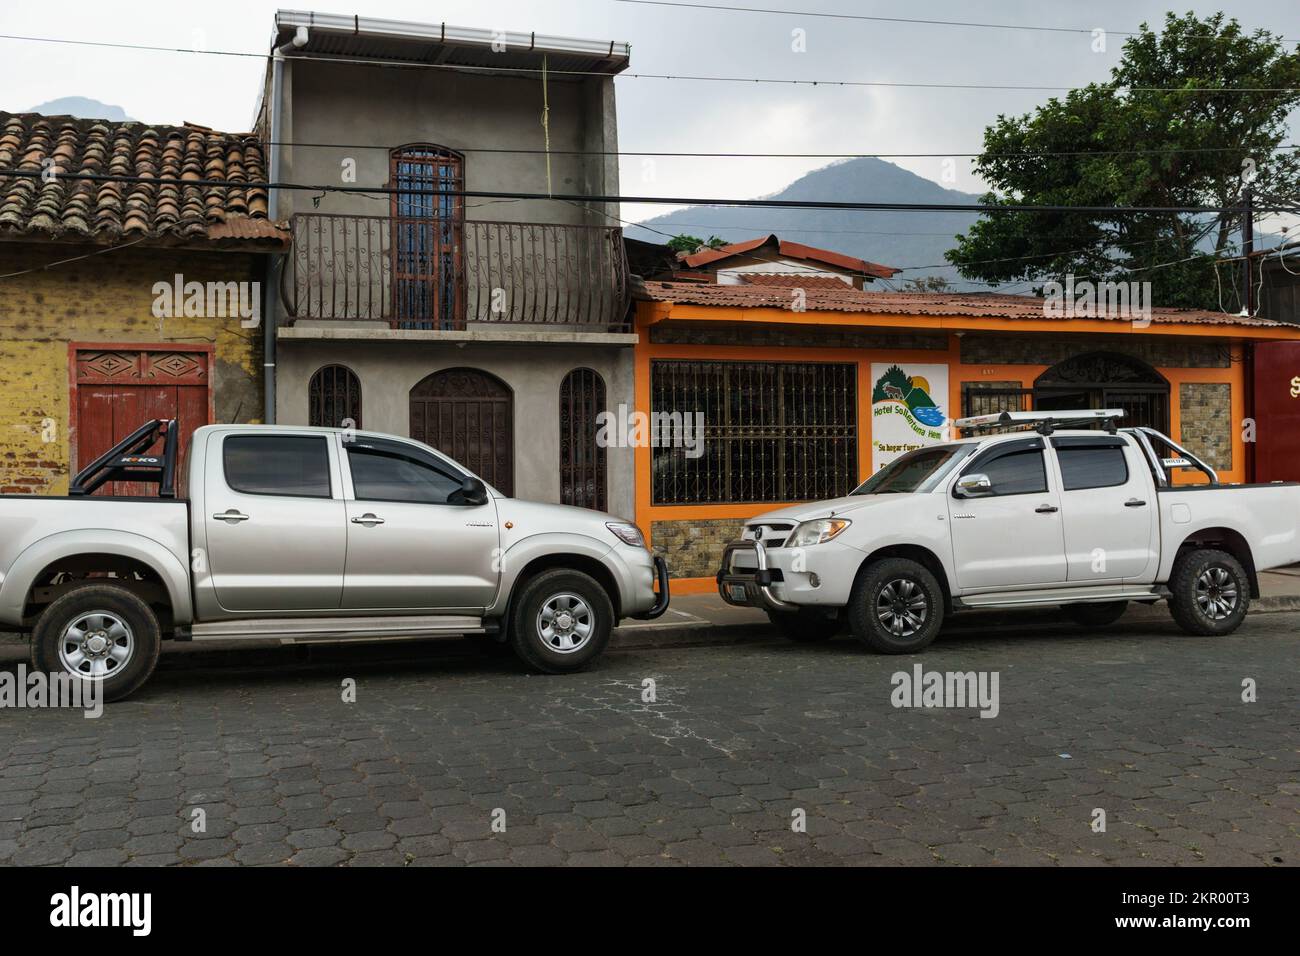 Two white HiLuxes front bumpers facing each other.  The HiLux is one of the most popular trucks in Nicaragua, and the police use blue and white ones. Stock Photo